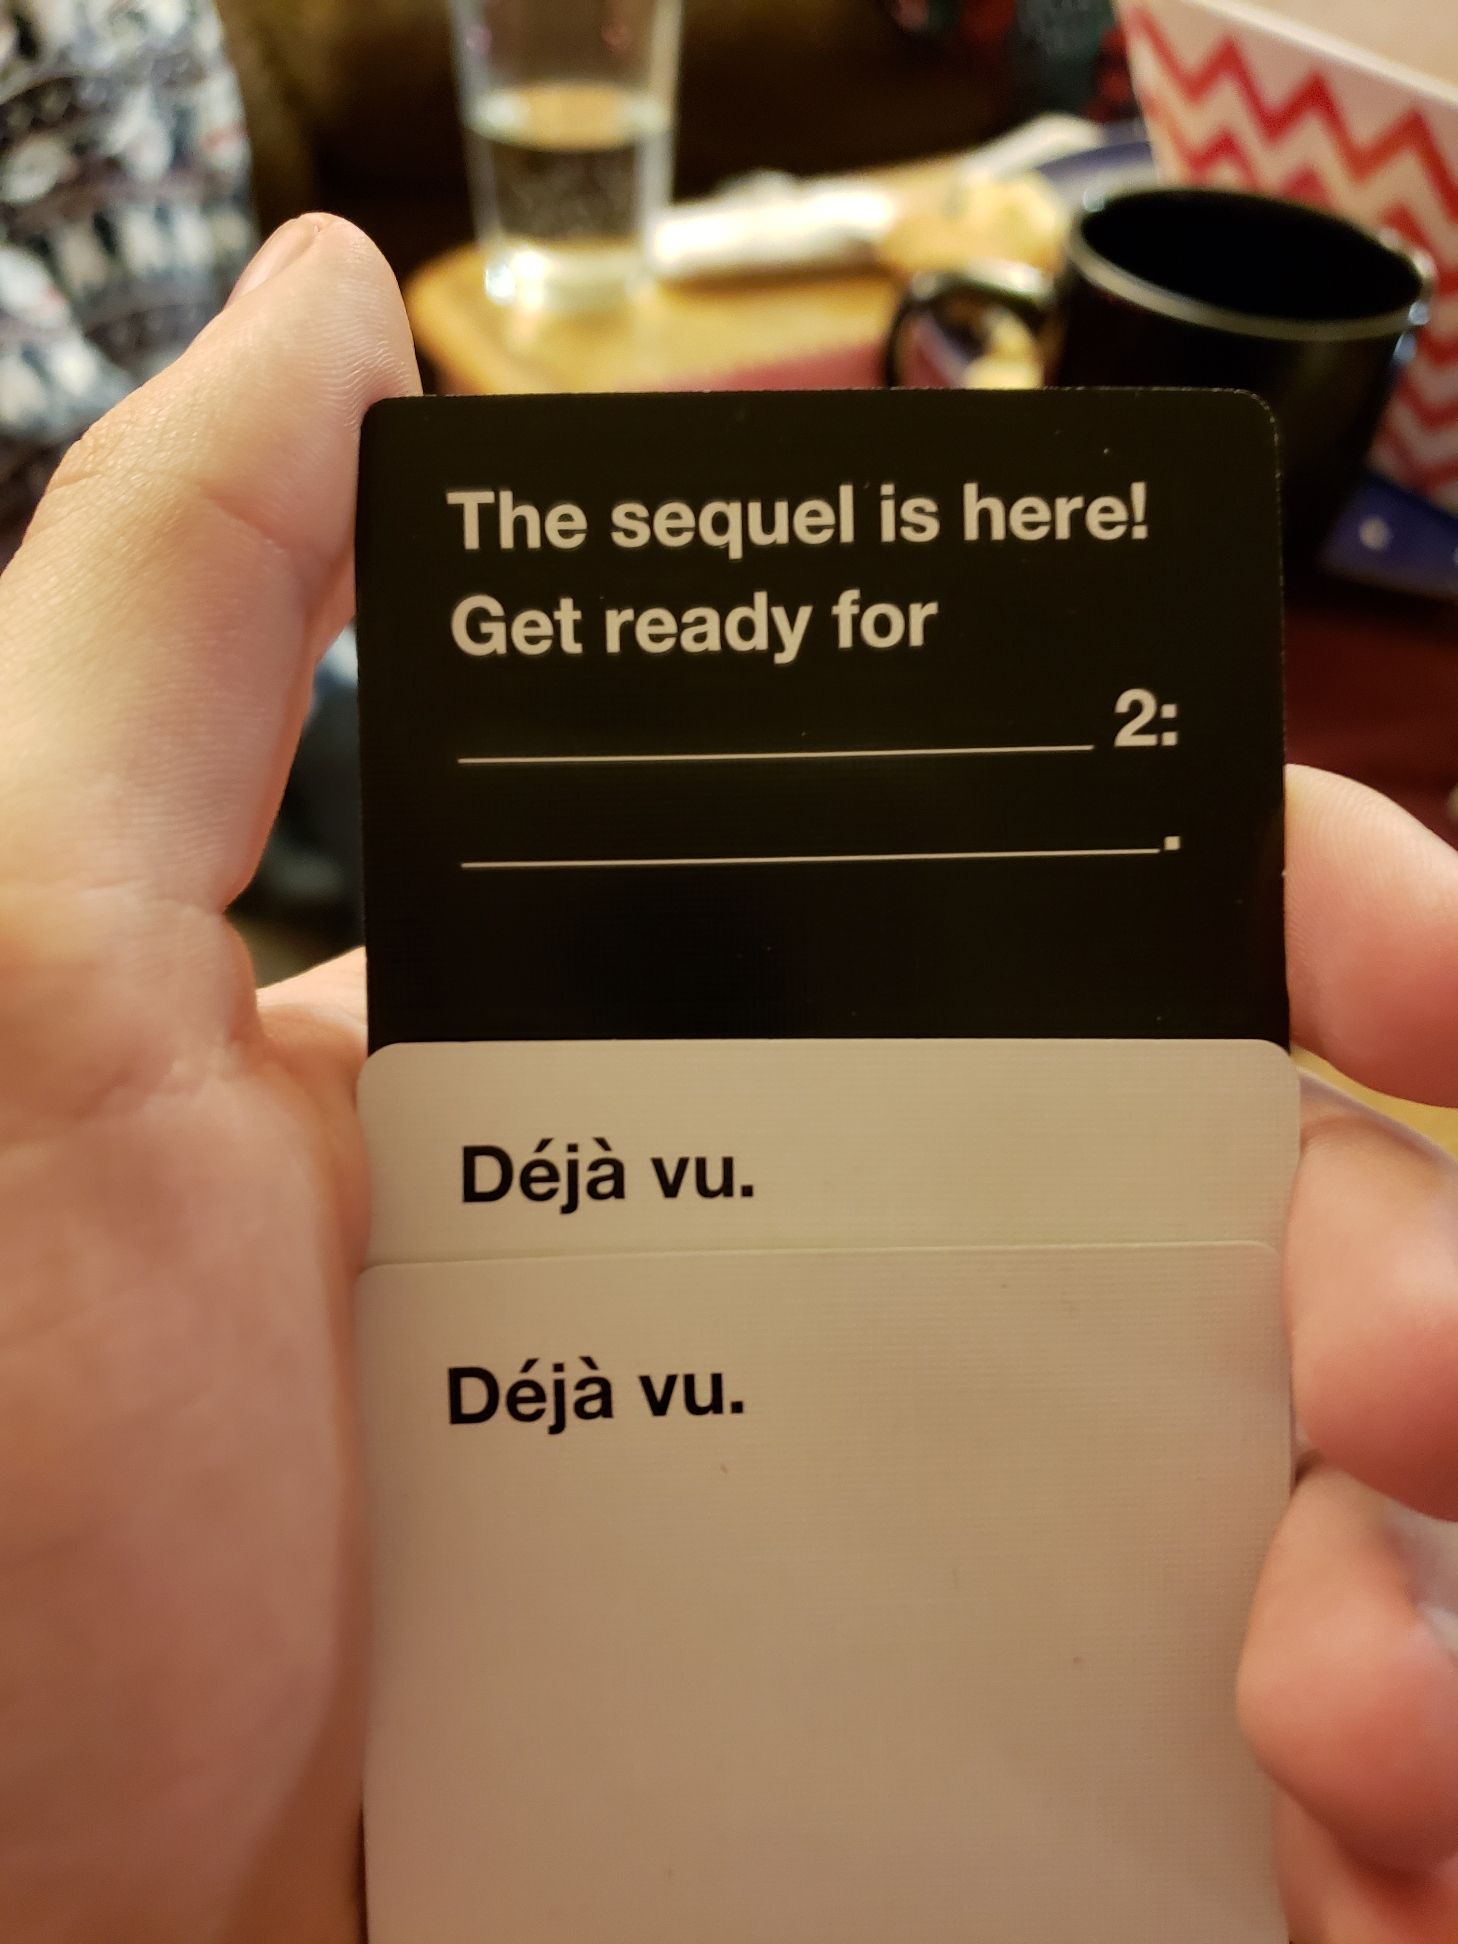 Got lucky with the draw during Cards Against Humanity